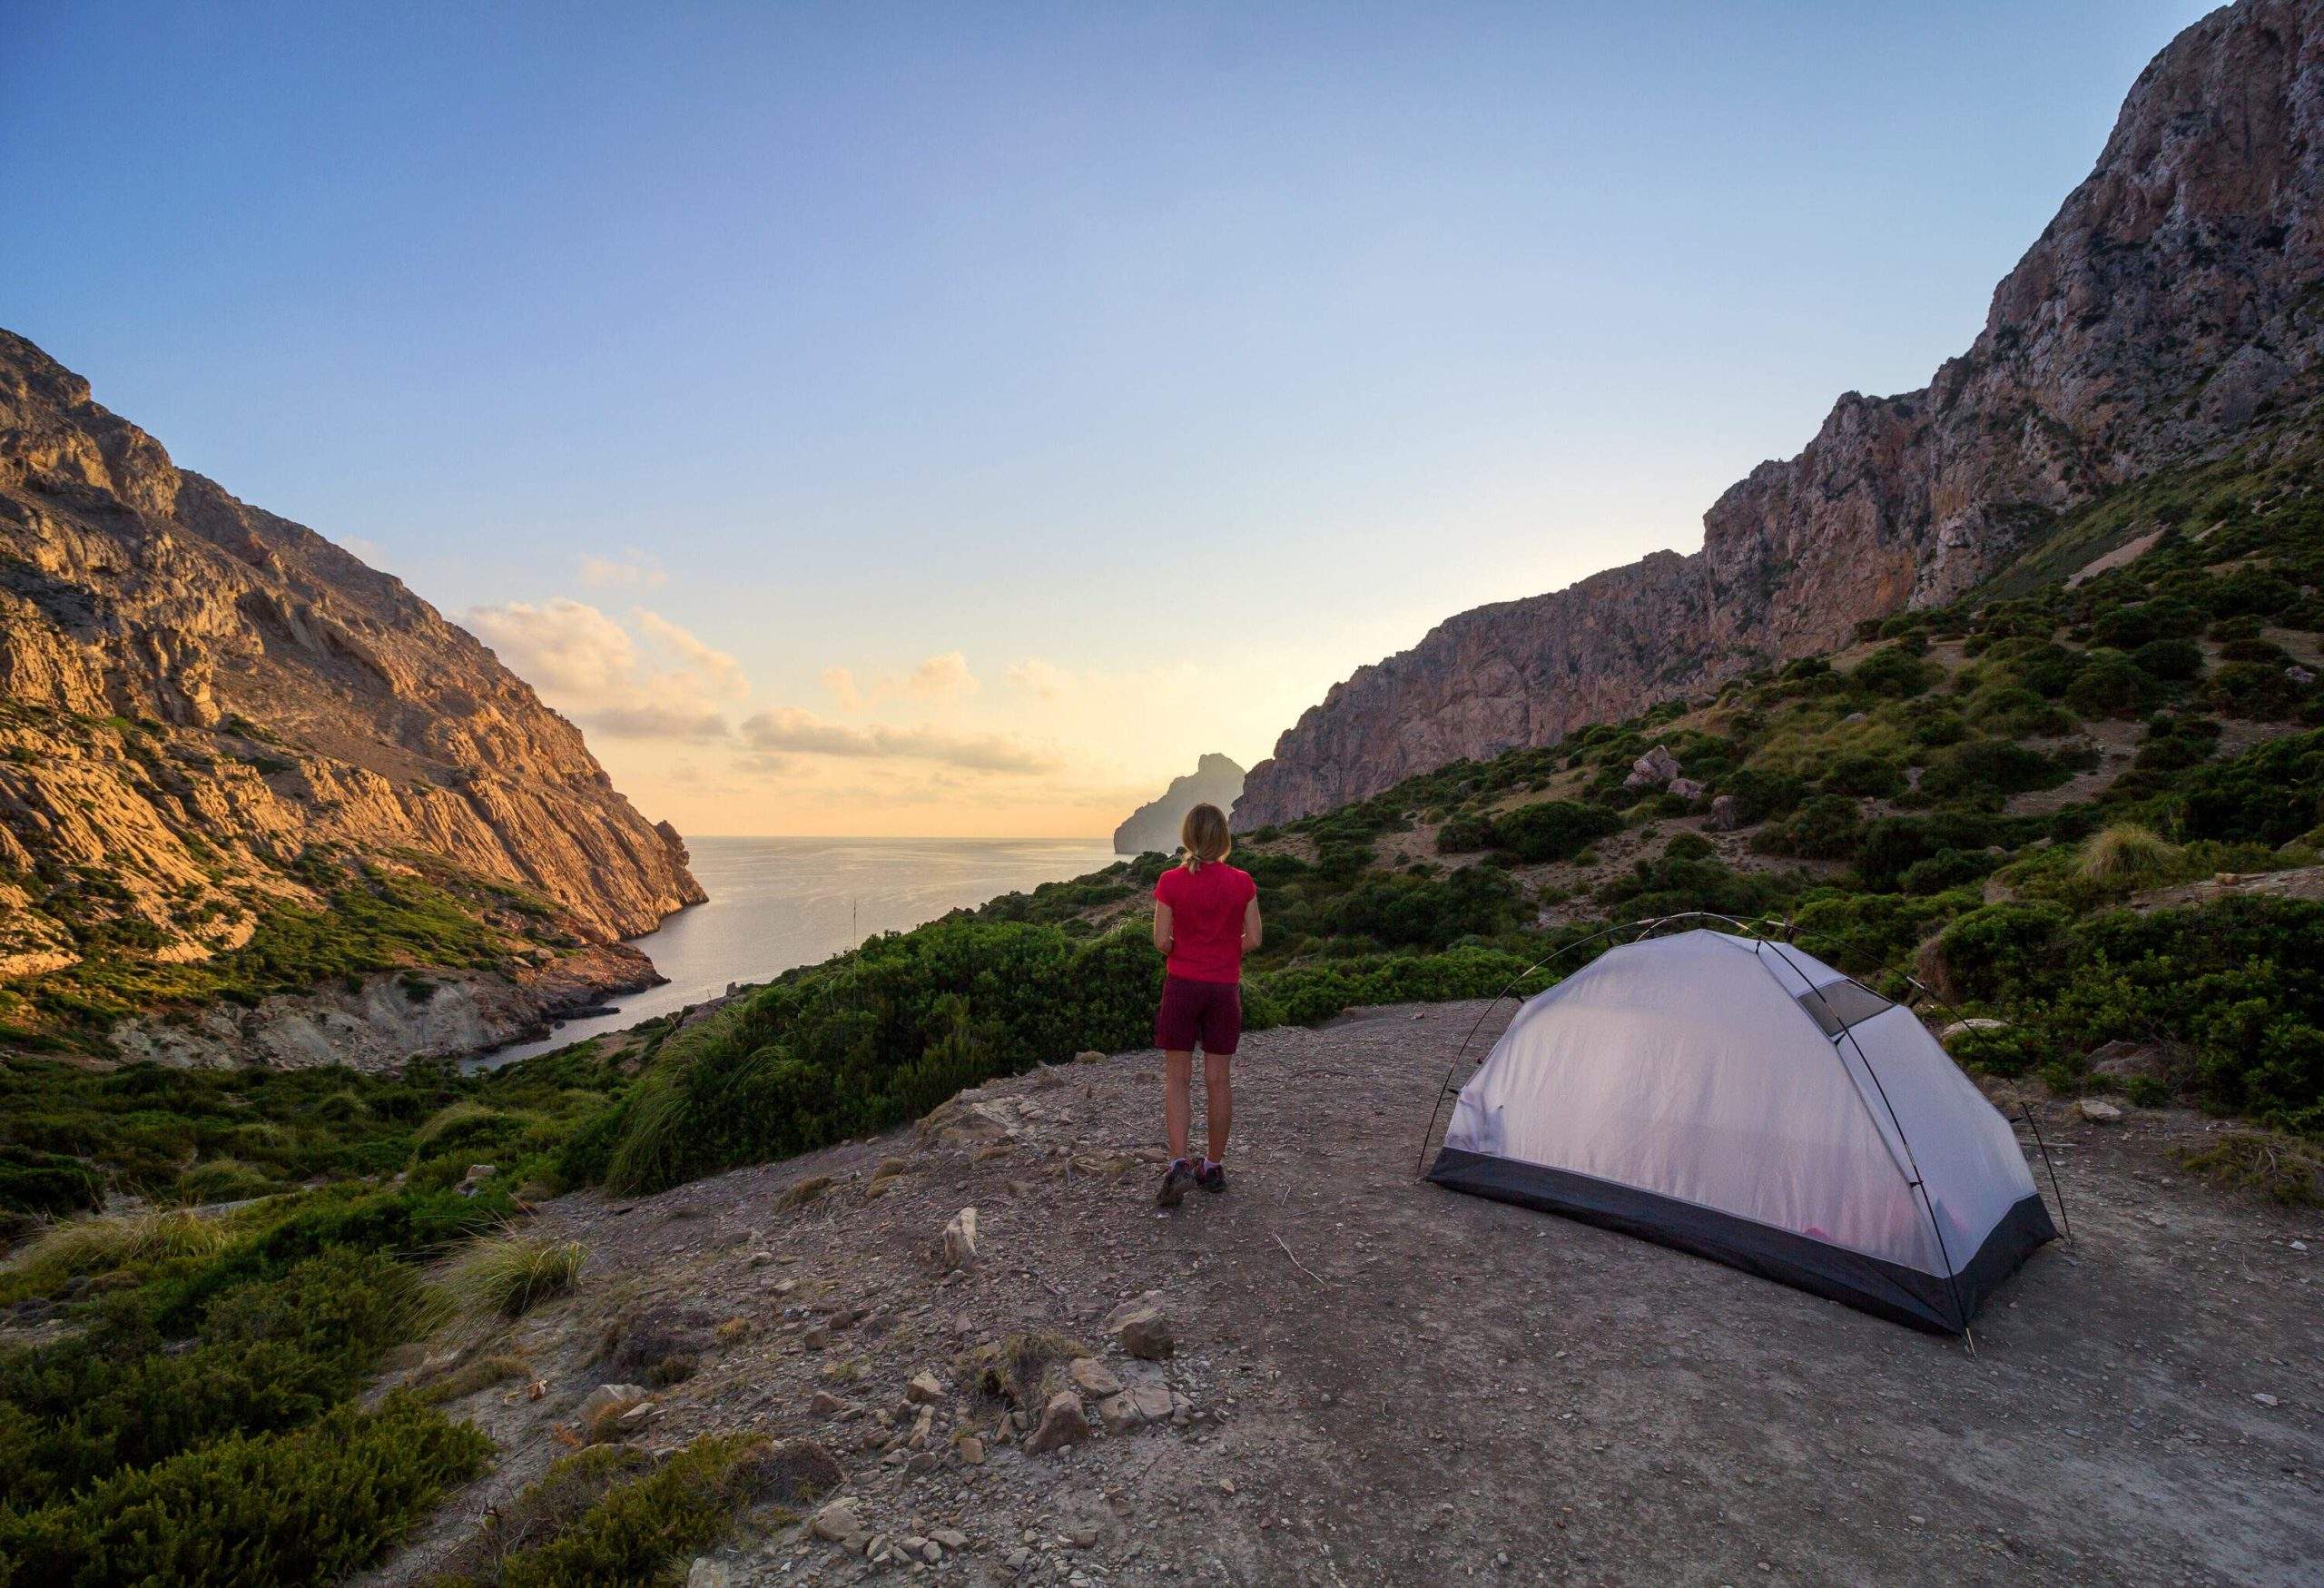 A lady watches the sunrise behind the rough mountains as she stands next to a white tent.